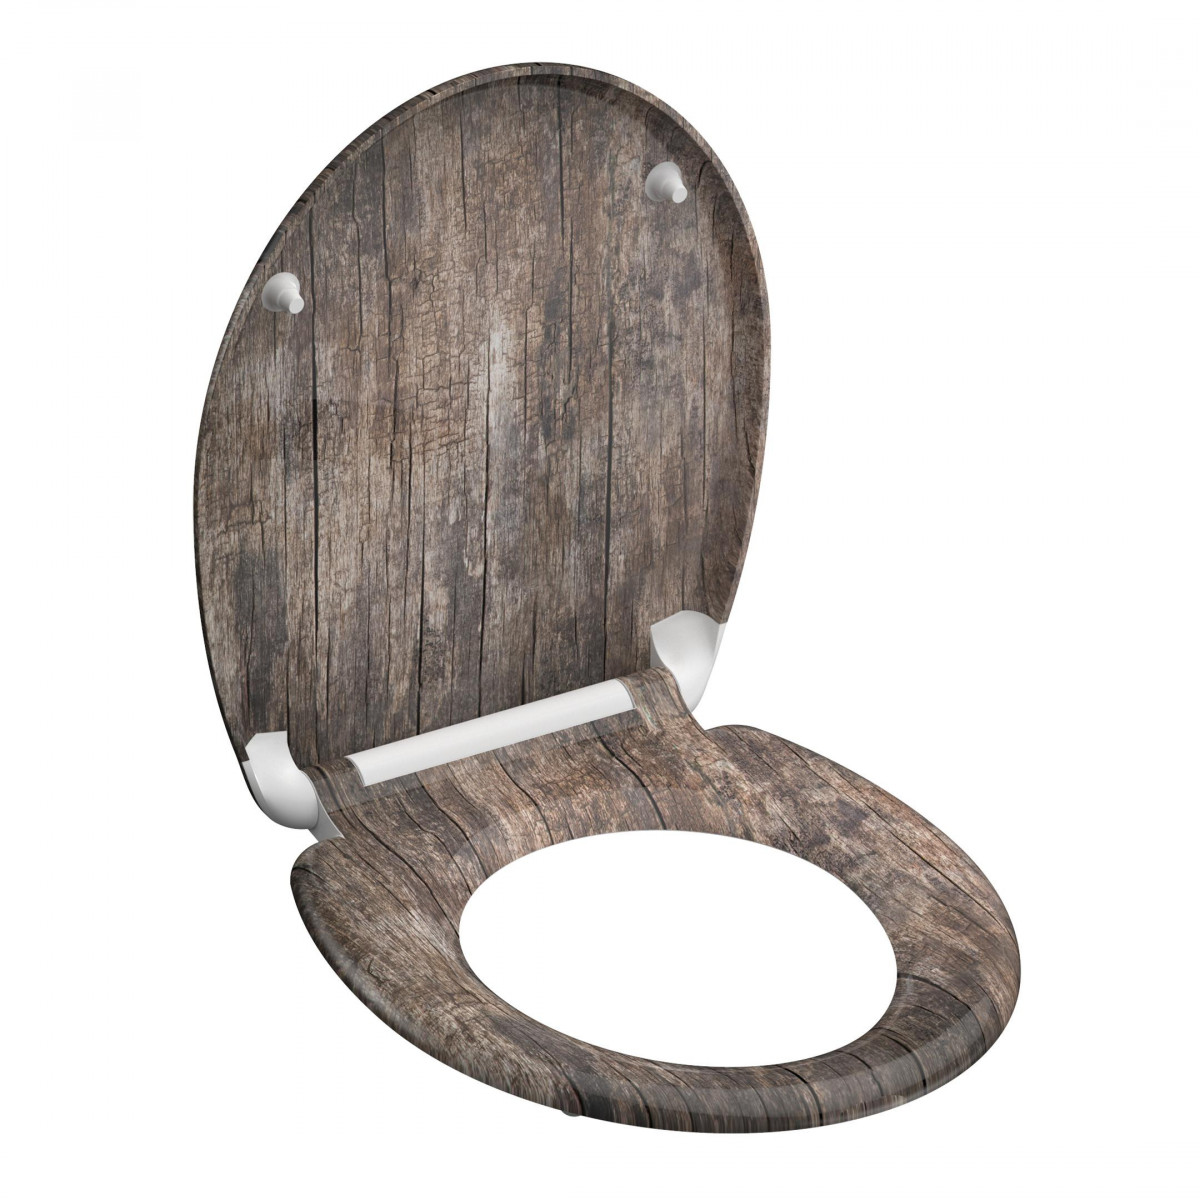 Duroplast Toilet Seat OLD WOOD with Soft Close and Quick Release